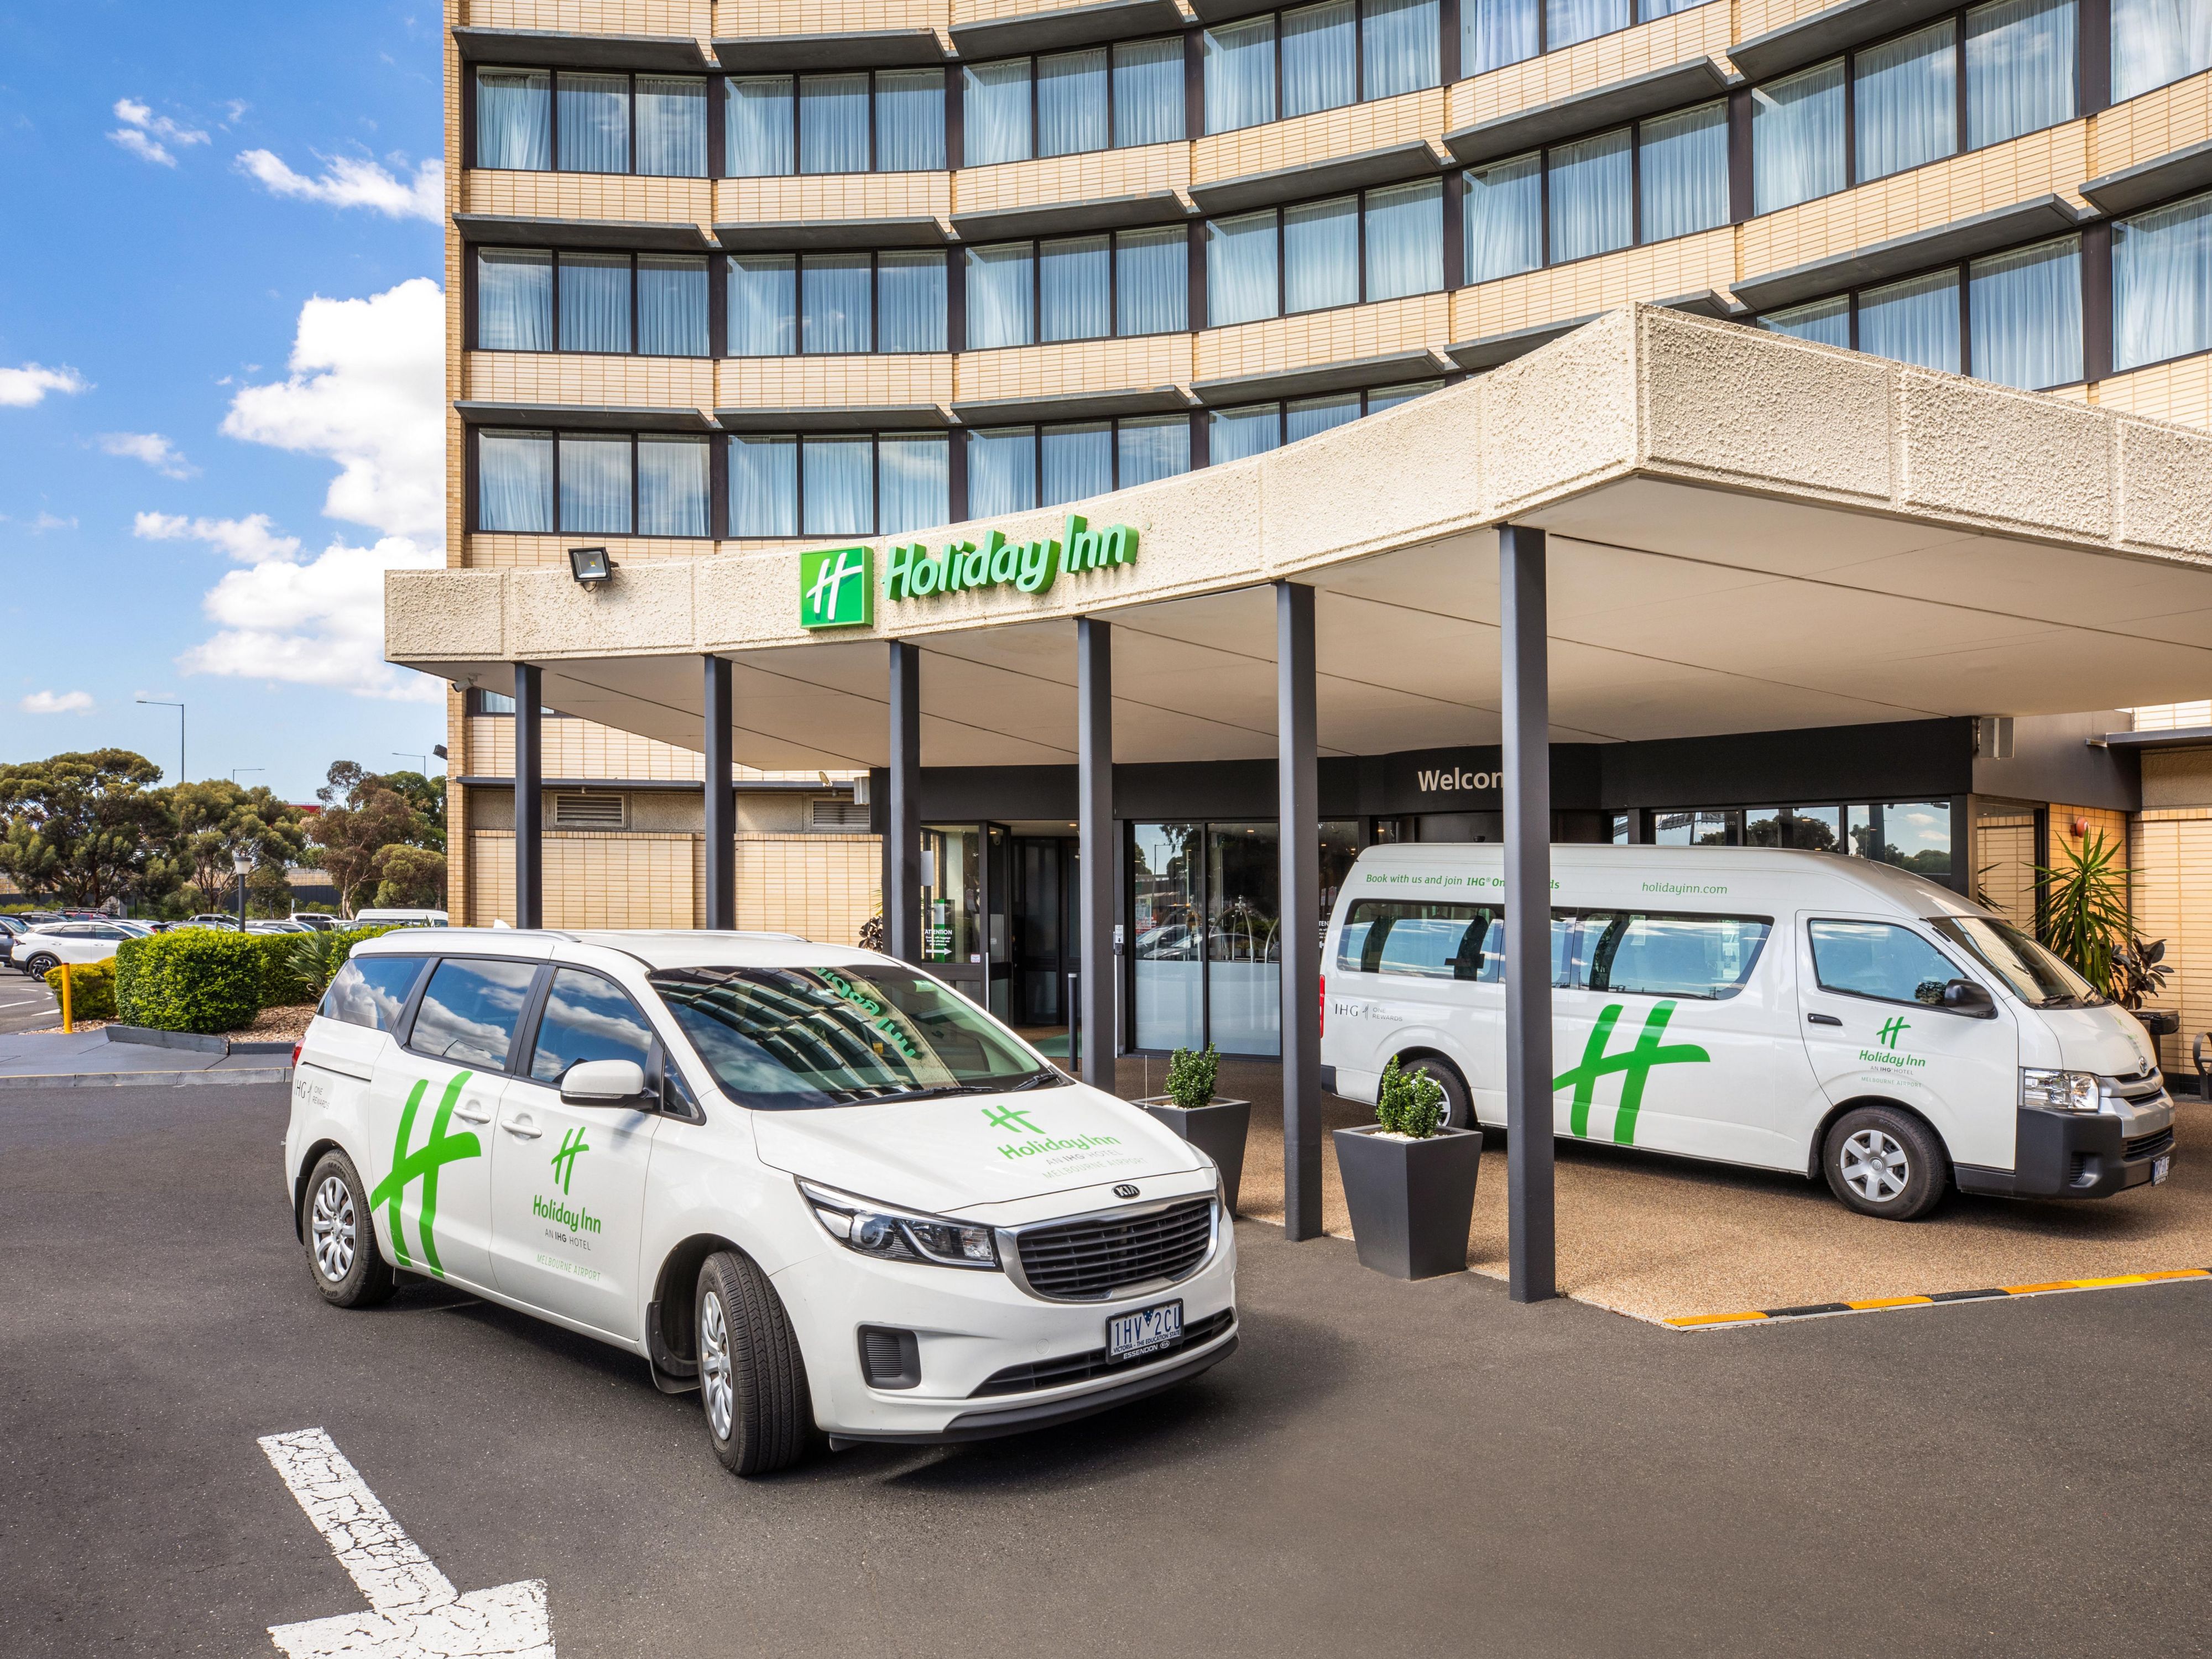 We have shuttle which offers transfers to Melbourne Airport 24 hours a day.